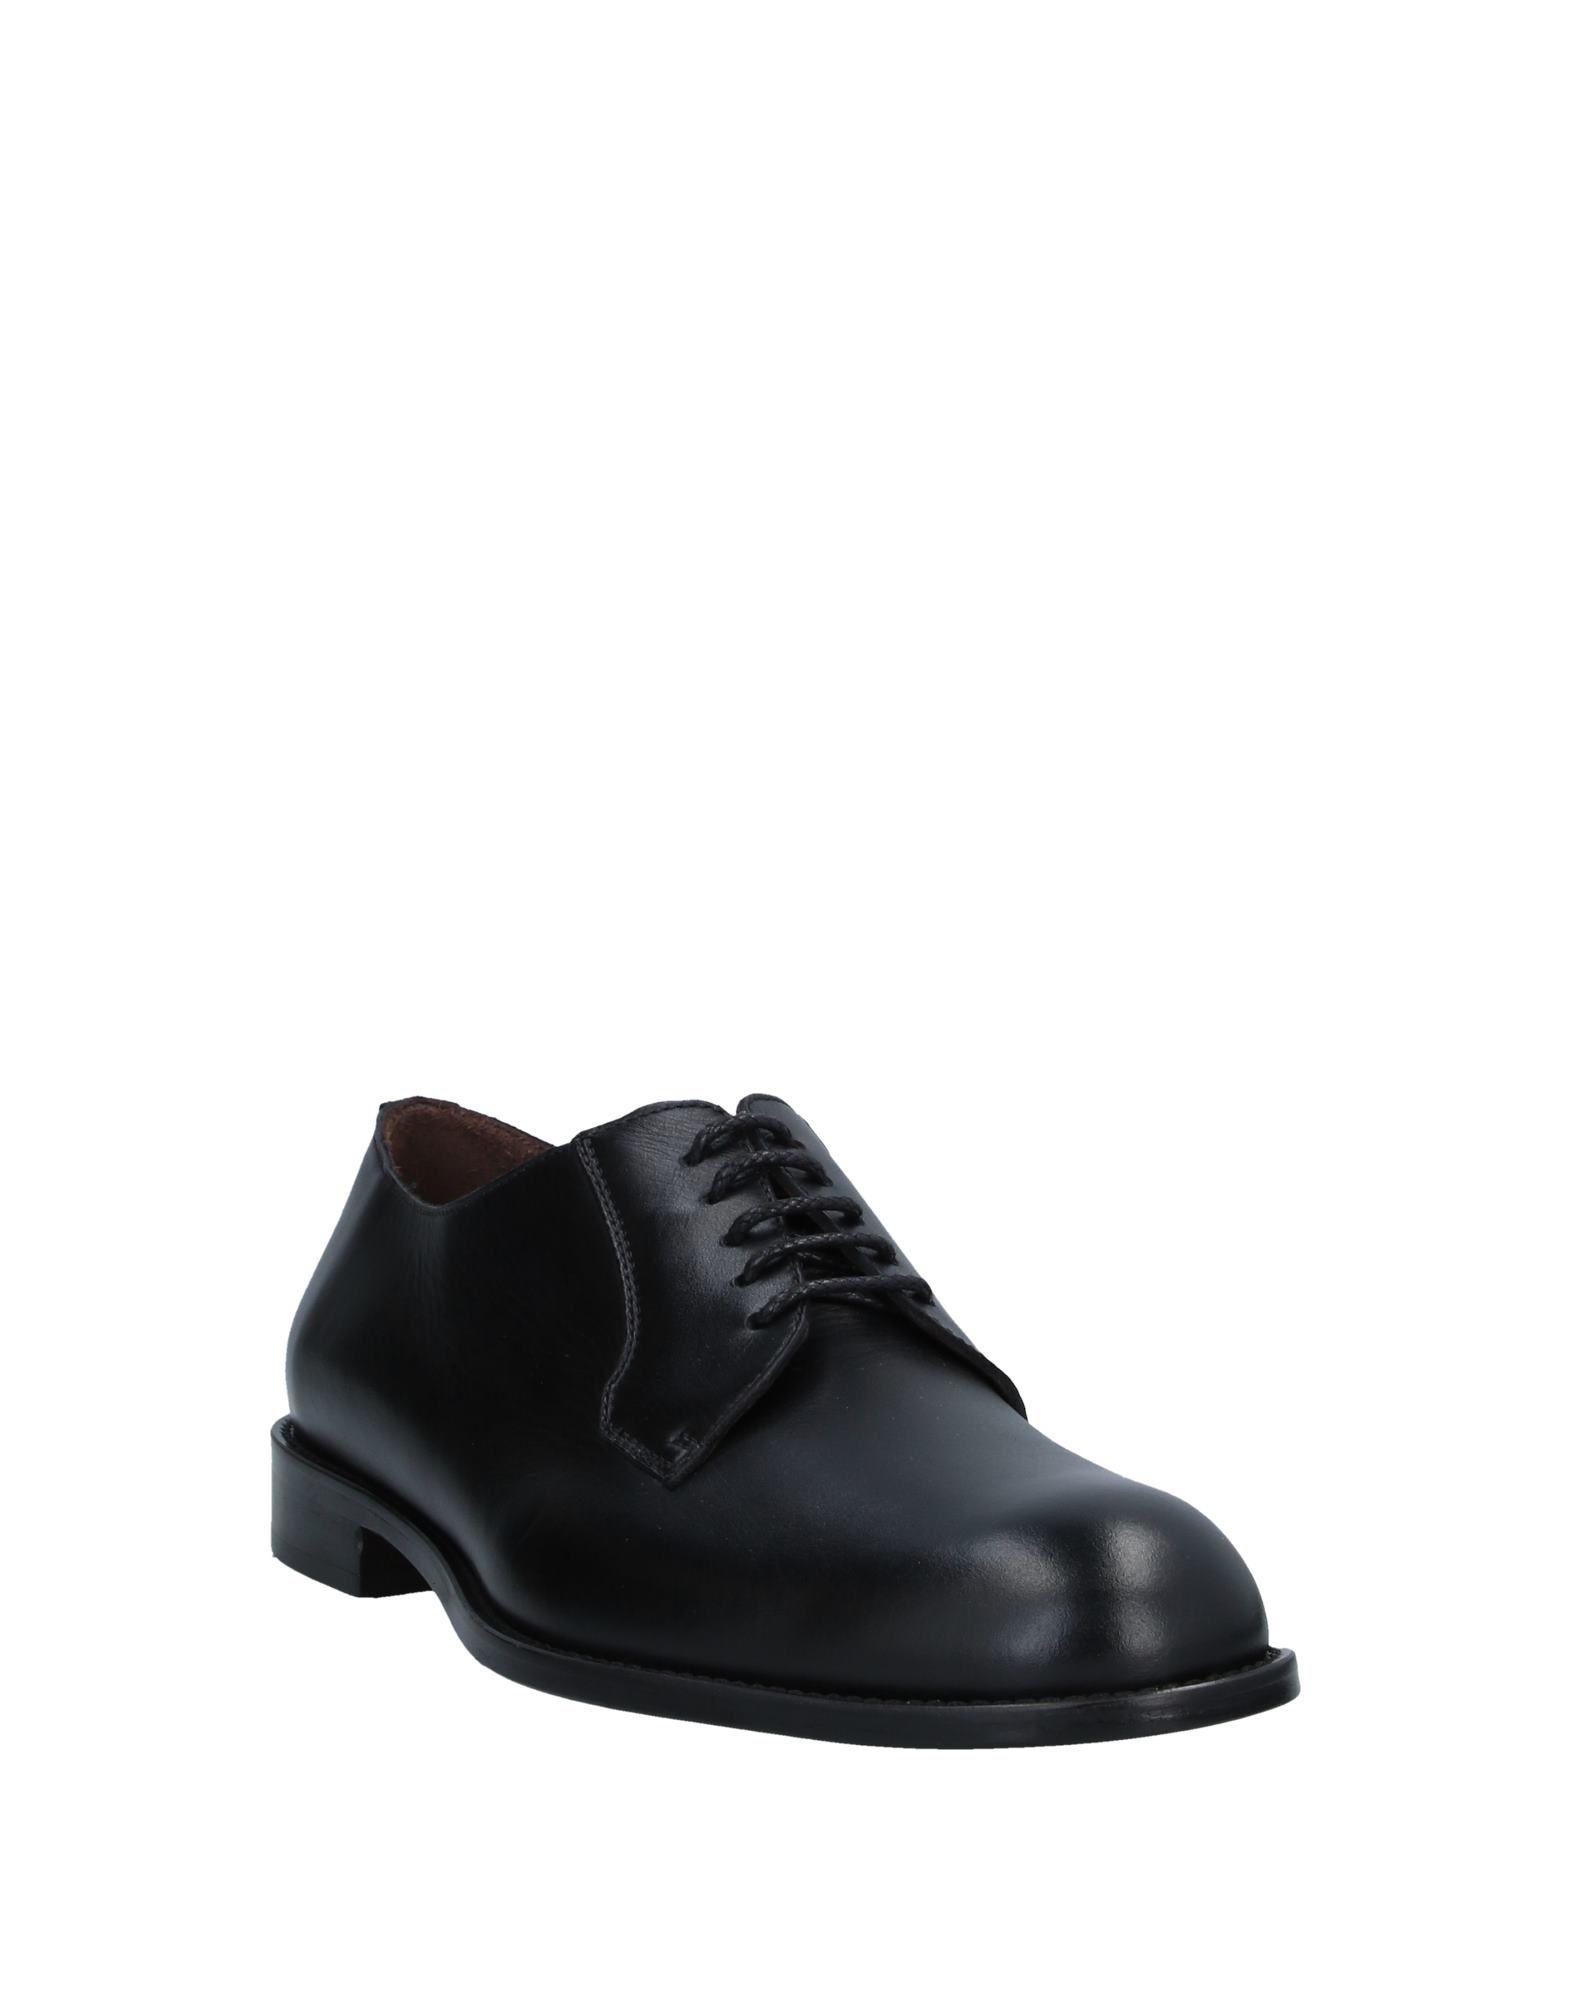 Bruno Magli Leather Lace-up Shoe in Black for Men - Lyst